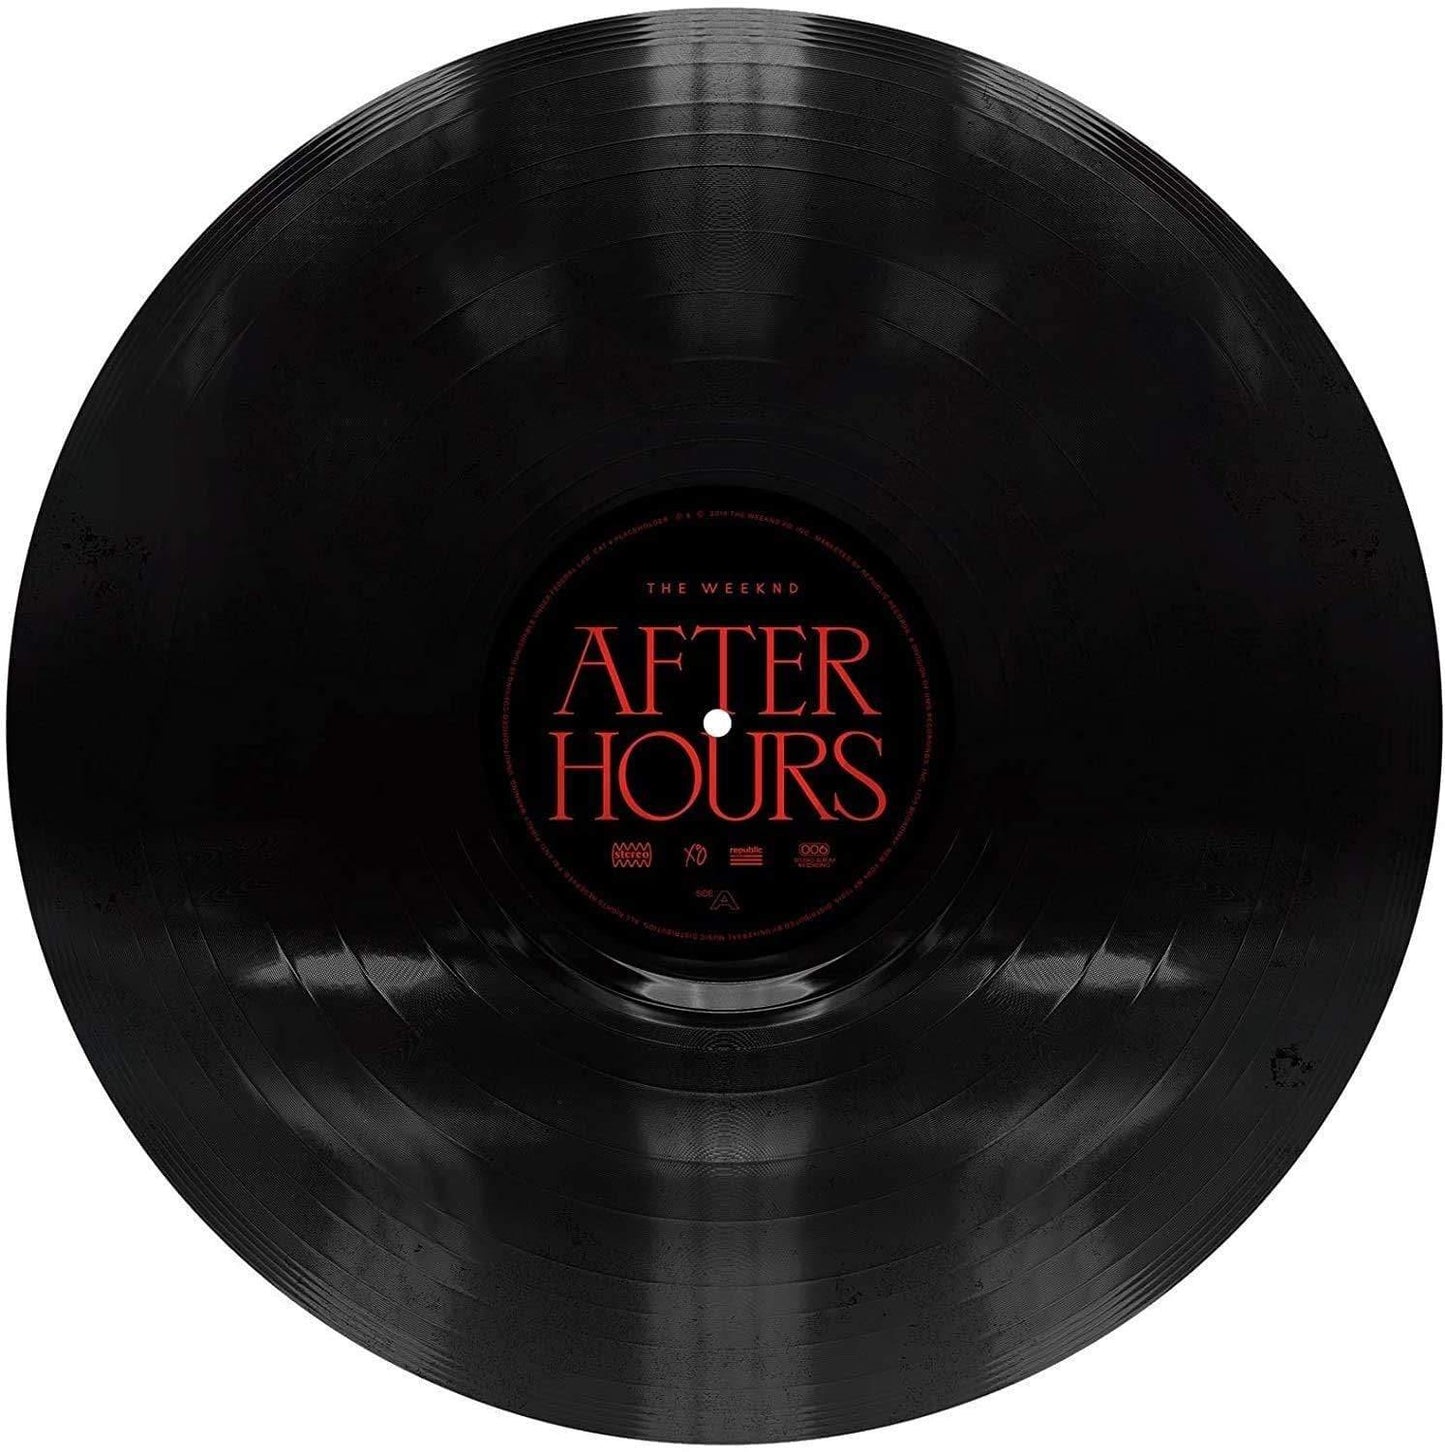 The Weeknd - After Hours (Explicit, Gatefold Jacket) (2 LP) - Joco Records